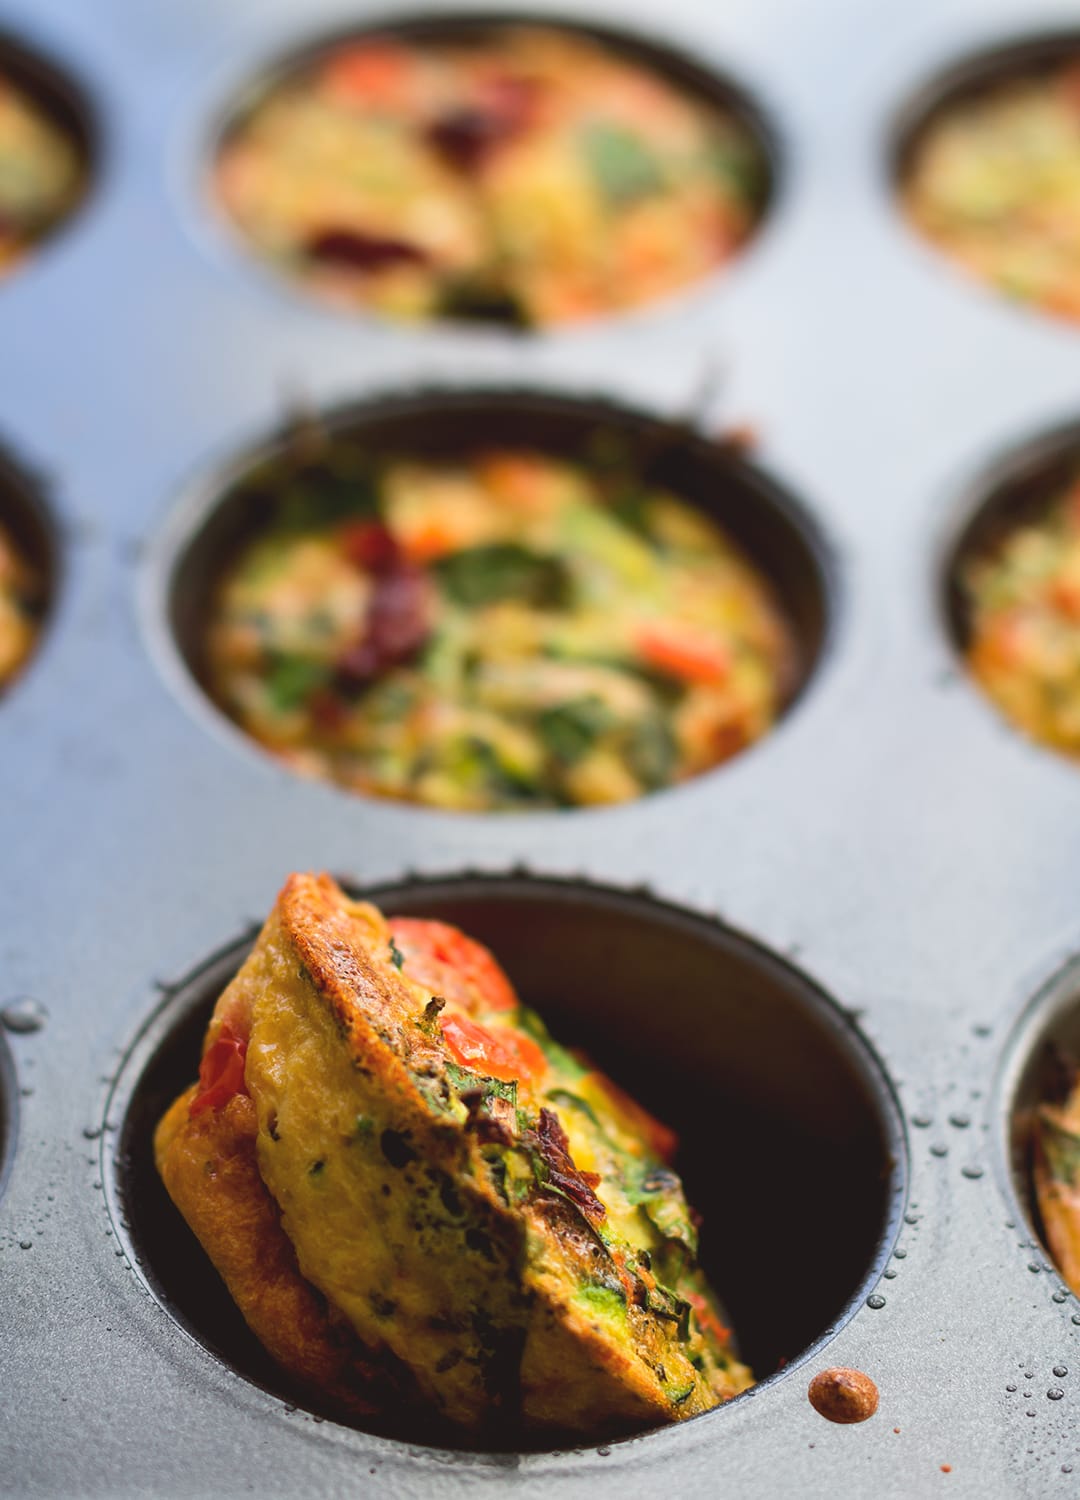 Healthy Breakfast Cheesy Egg Muffins - easy breakfast you can make ahead and eat on the go! Keep them in the fridge and add one or two to your salad for more protein! Delicious and cheesy muffins without the use of cheese - these are dairy free! | thehealthfulideas.com